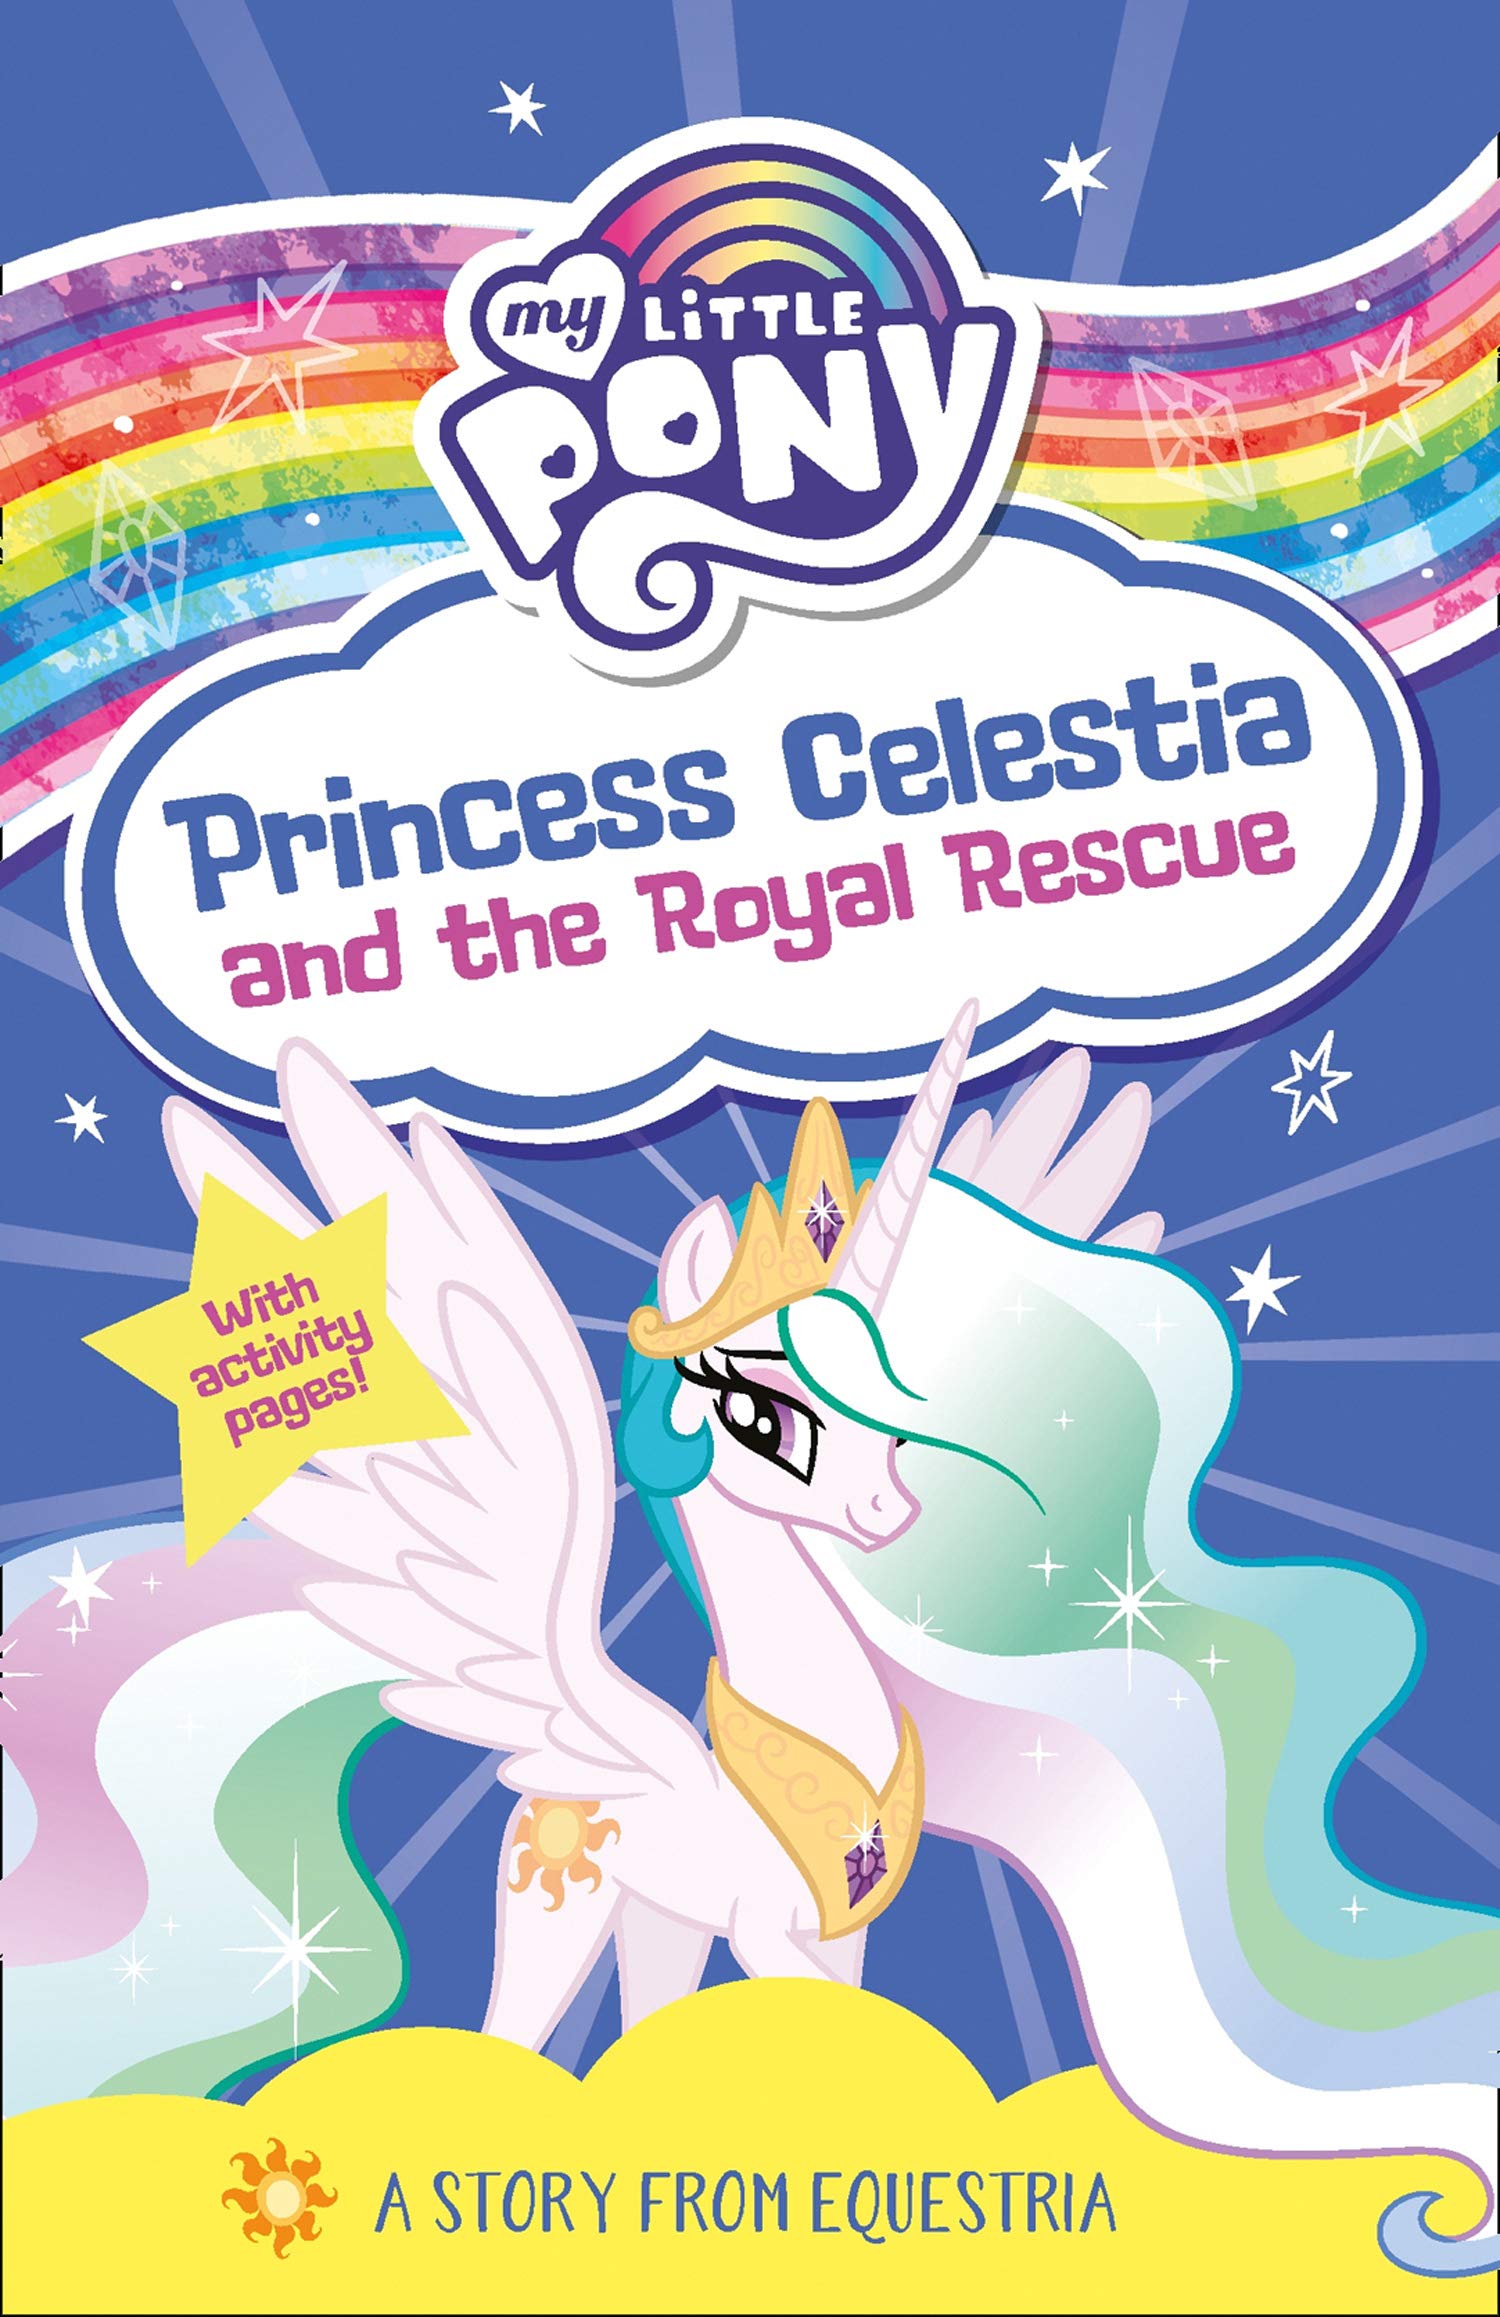 My Little Pony - Princess Celestia and the Royal Rescue